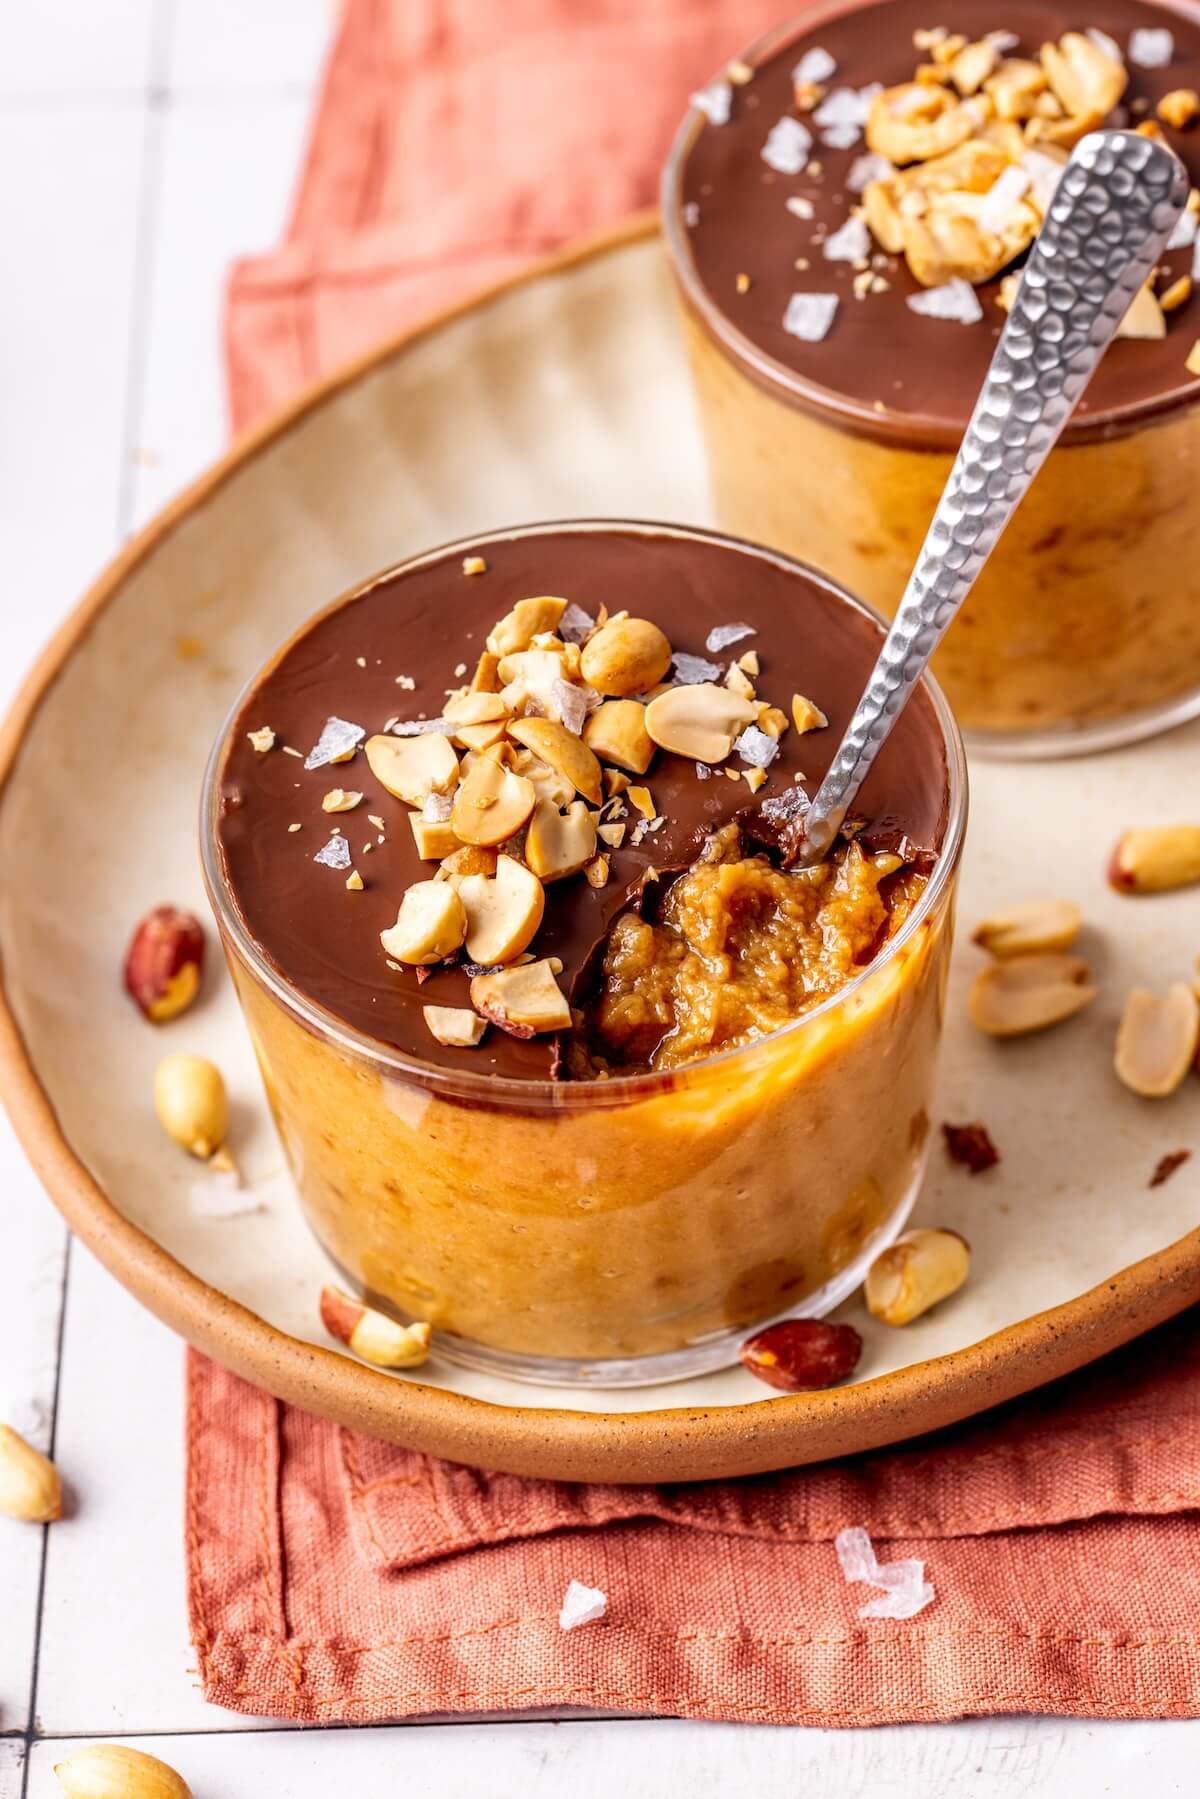 5-Ingredient Peanut Butter Mousse - Olivia Adriance